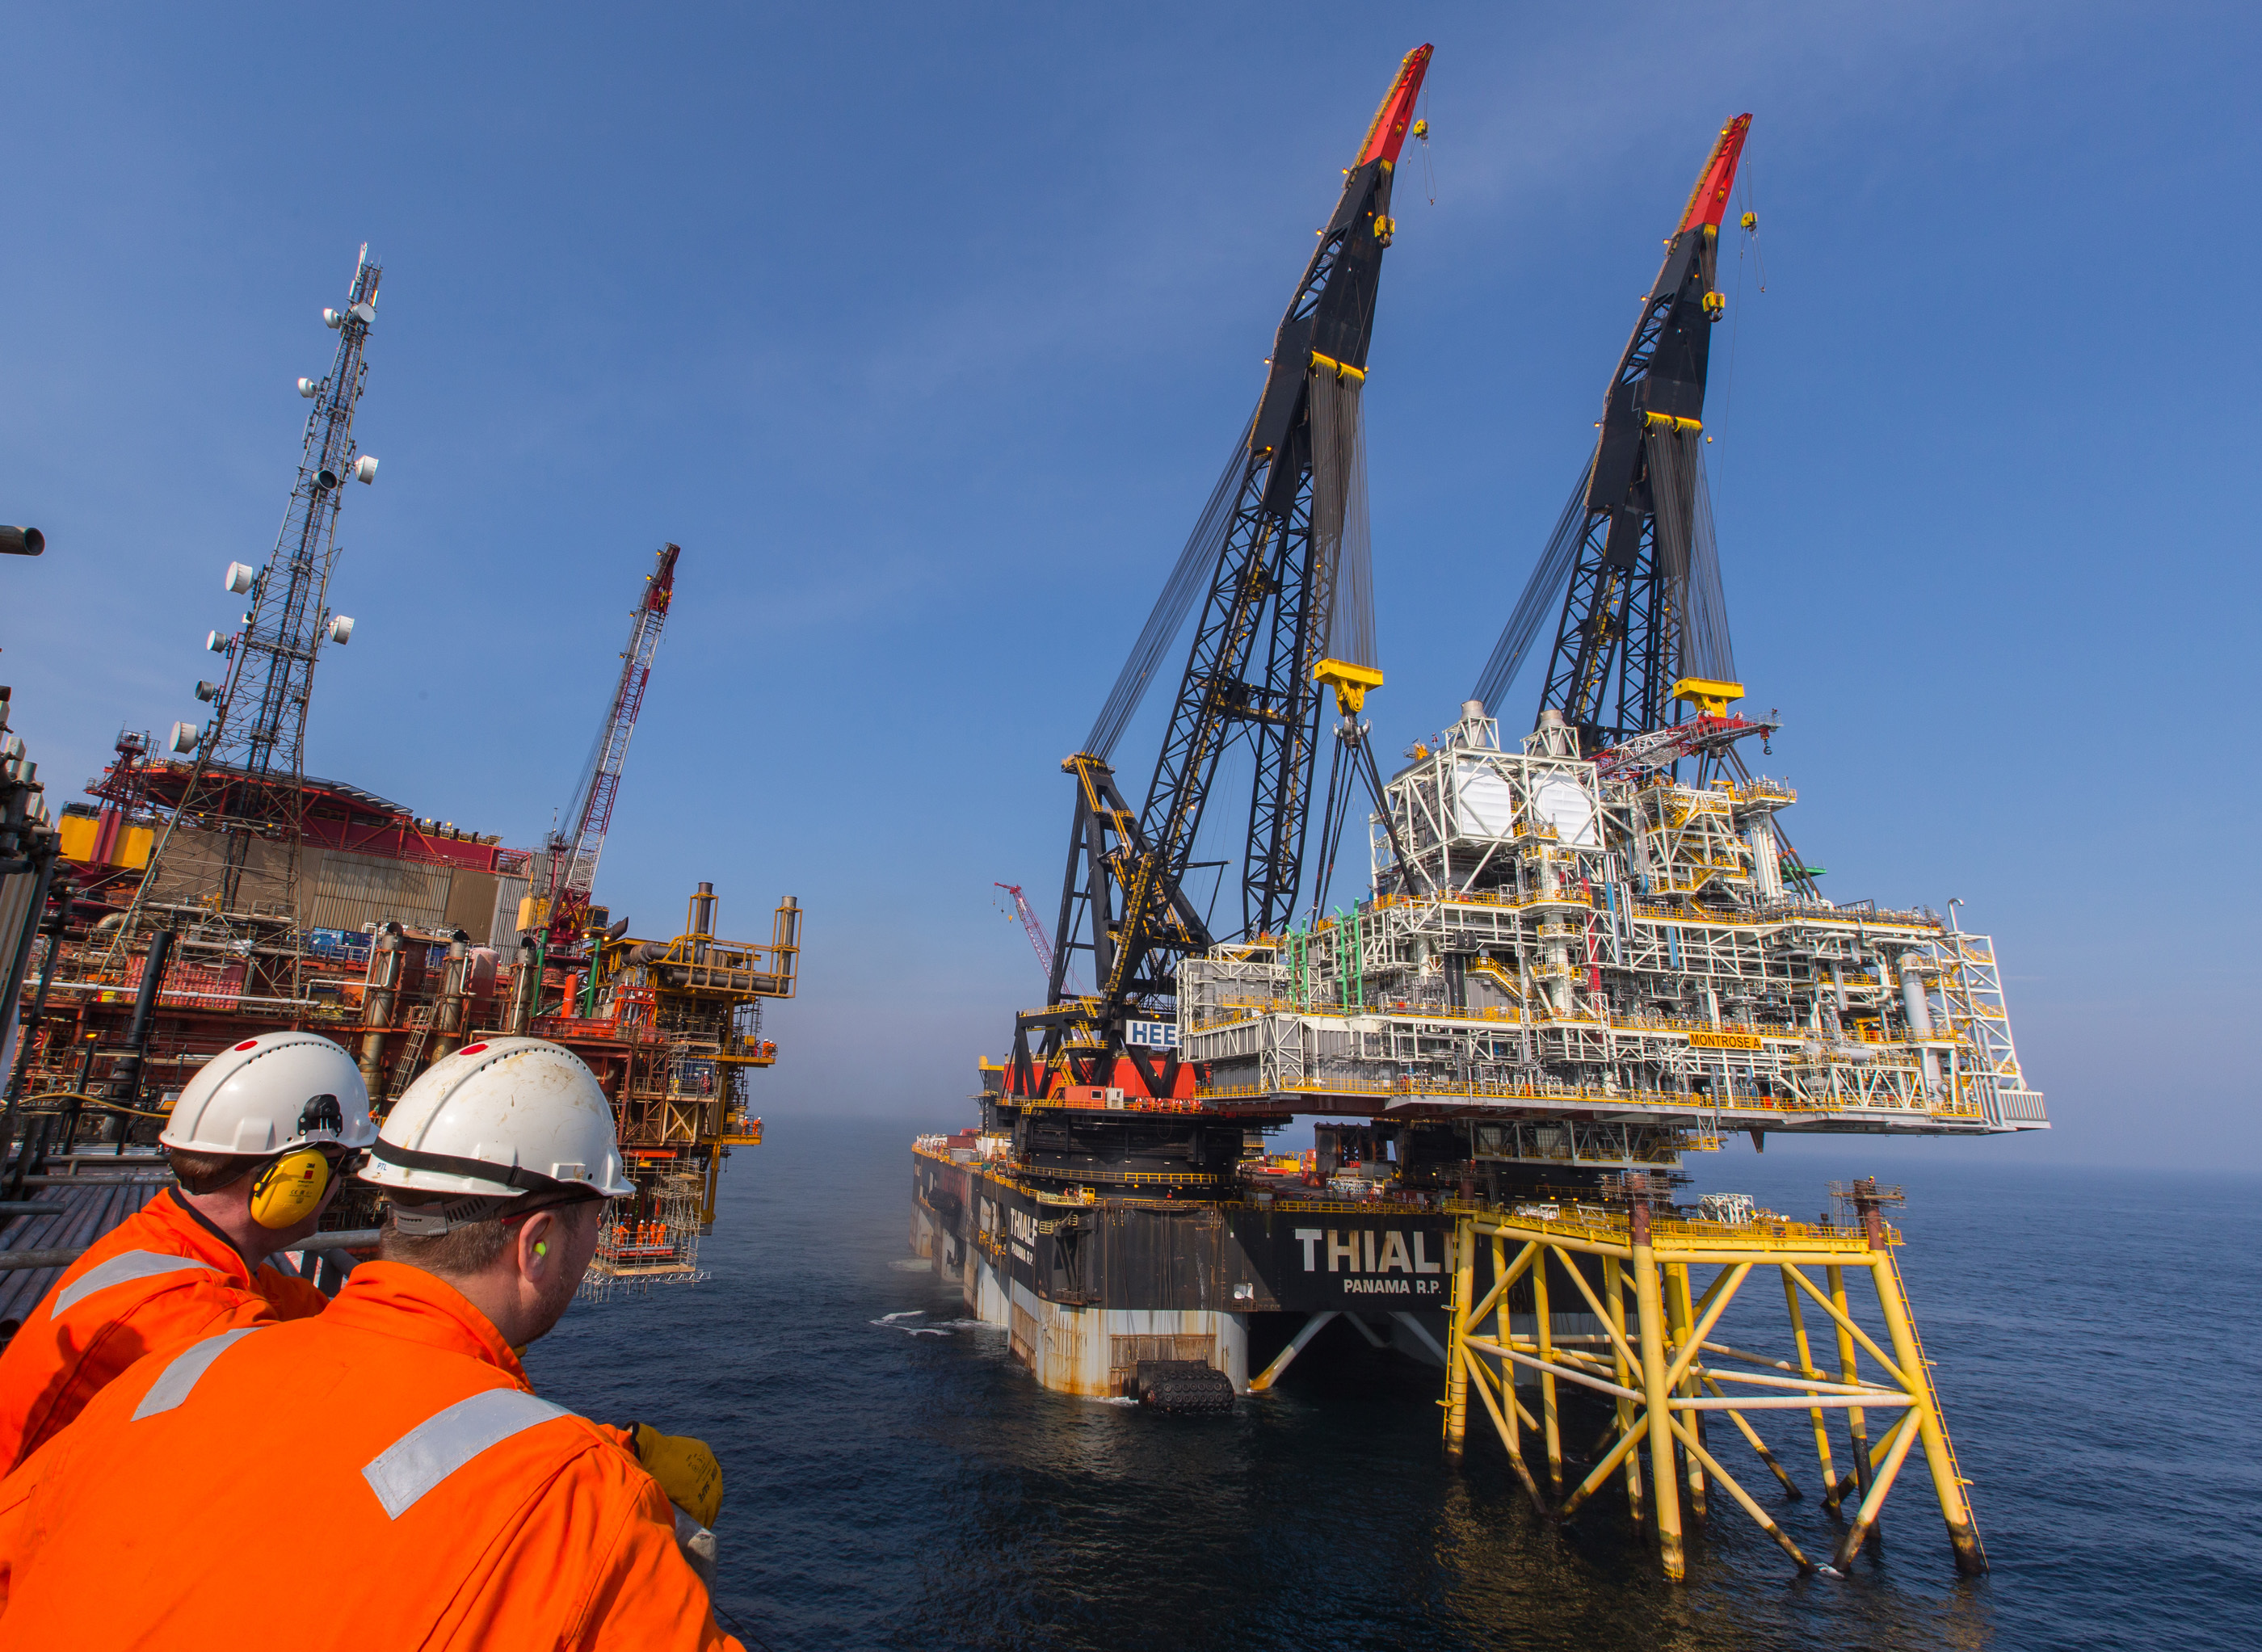 The new platform being installed in the North Sea.